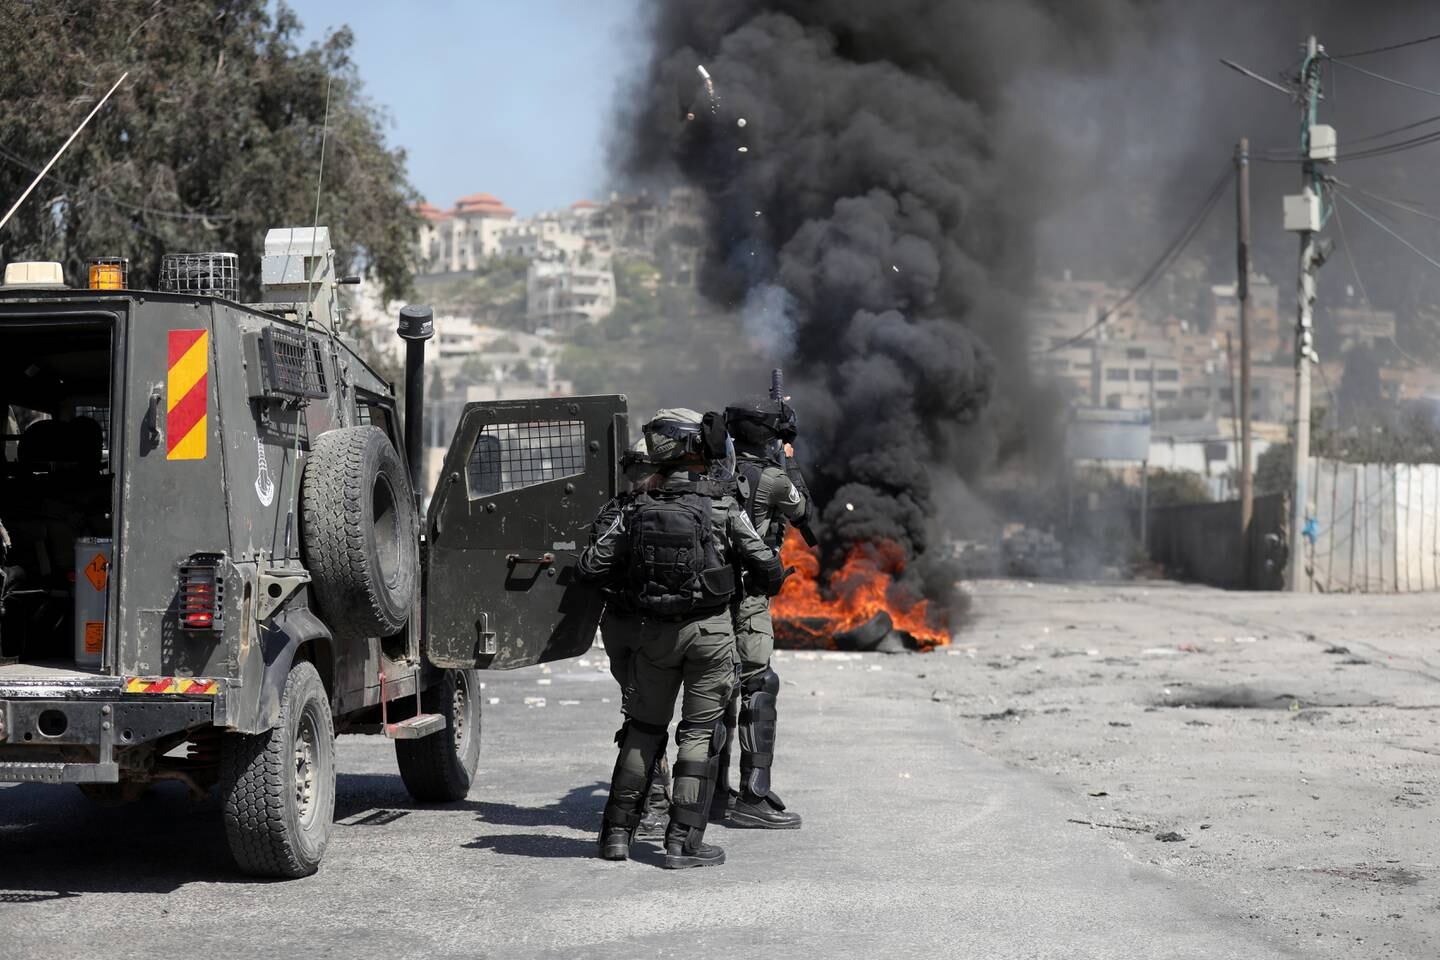 Israeli soldiers fire tear gas at Palestinians during clashes in Beita. EPA